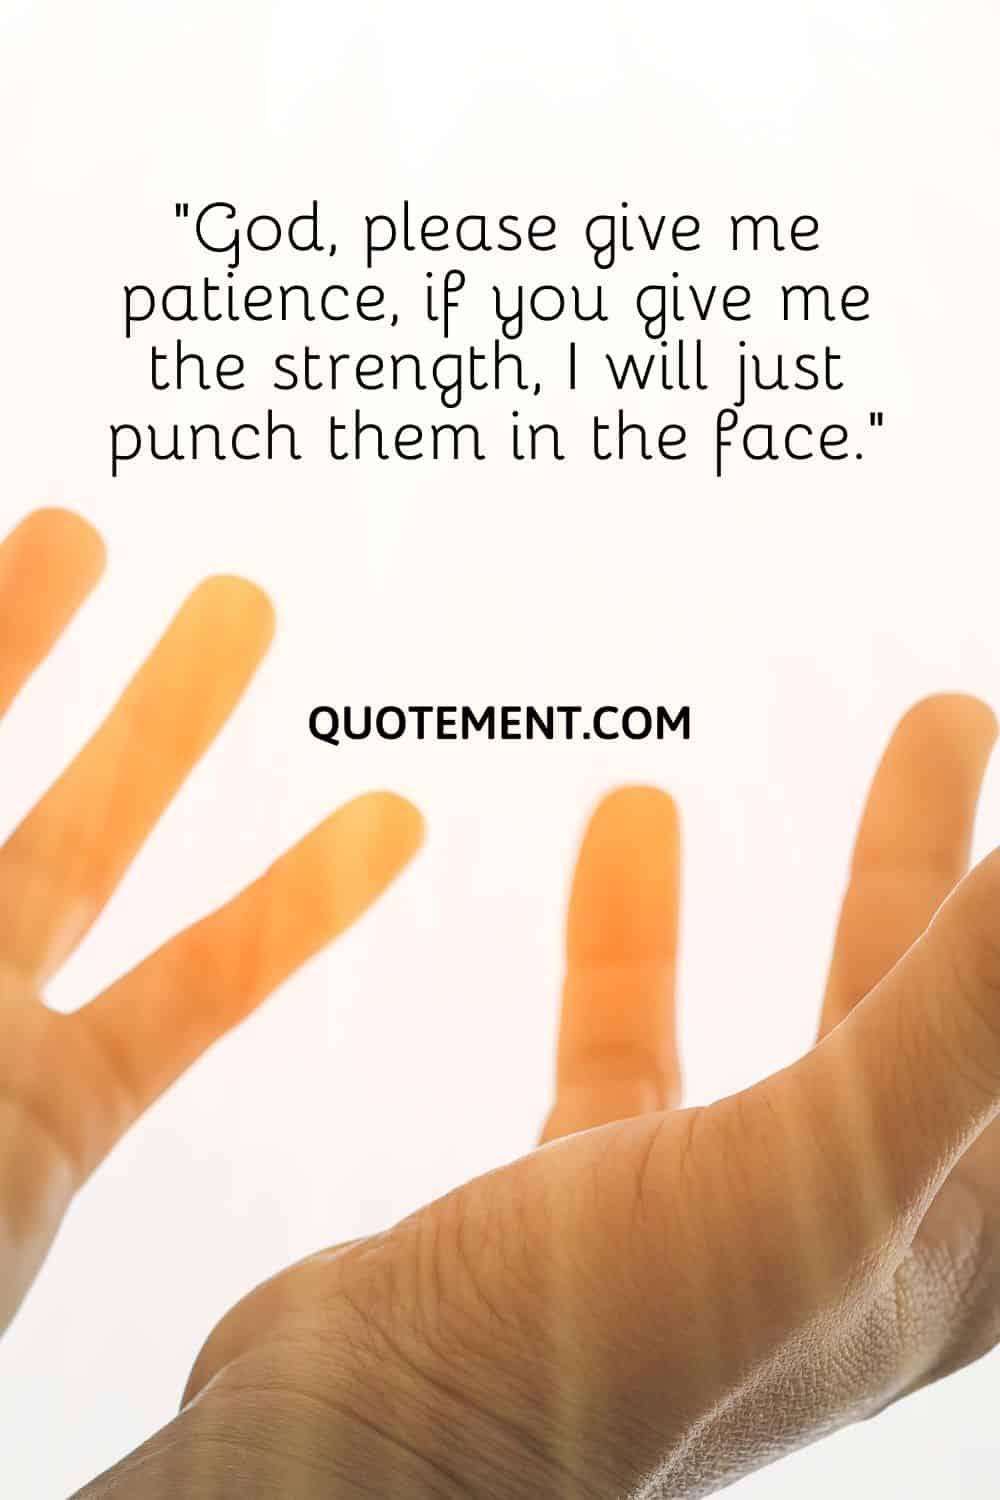 “God, please give me patience, if you give me the strength, I will just punch them in the face.”